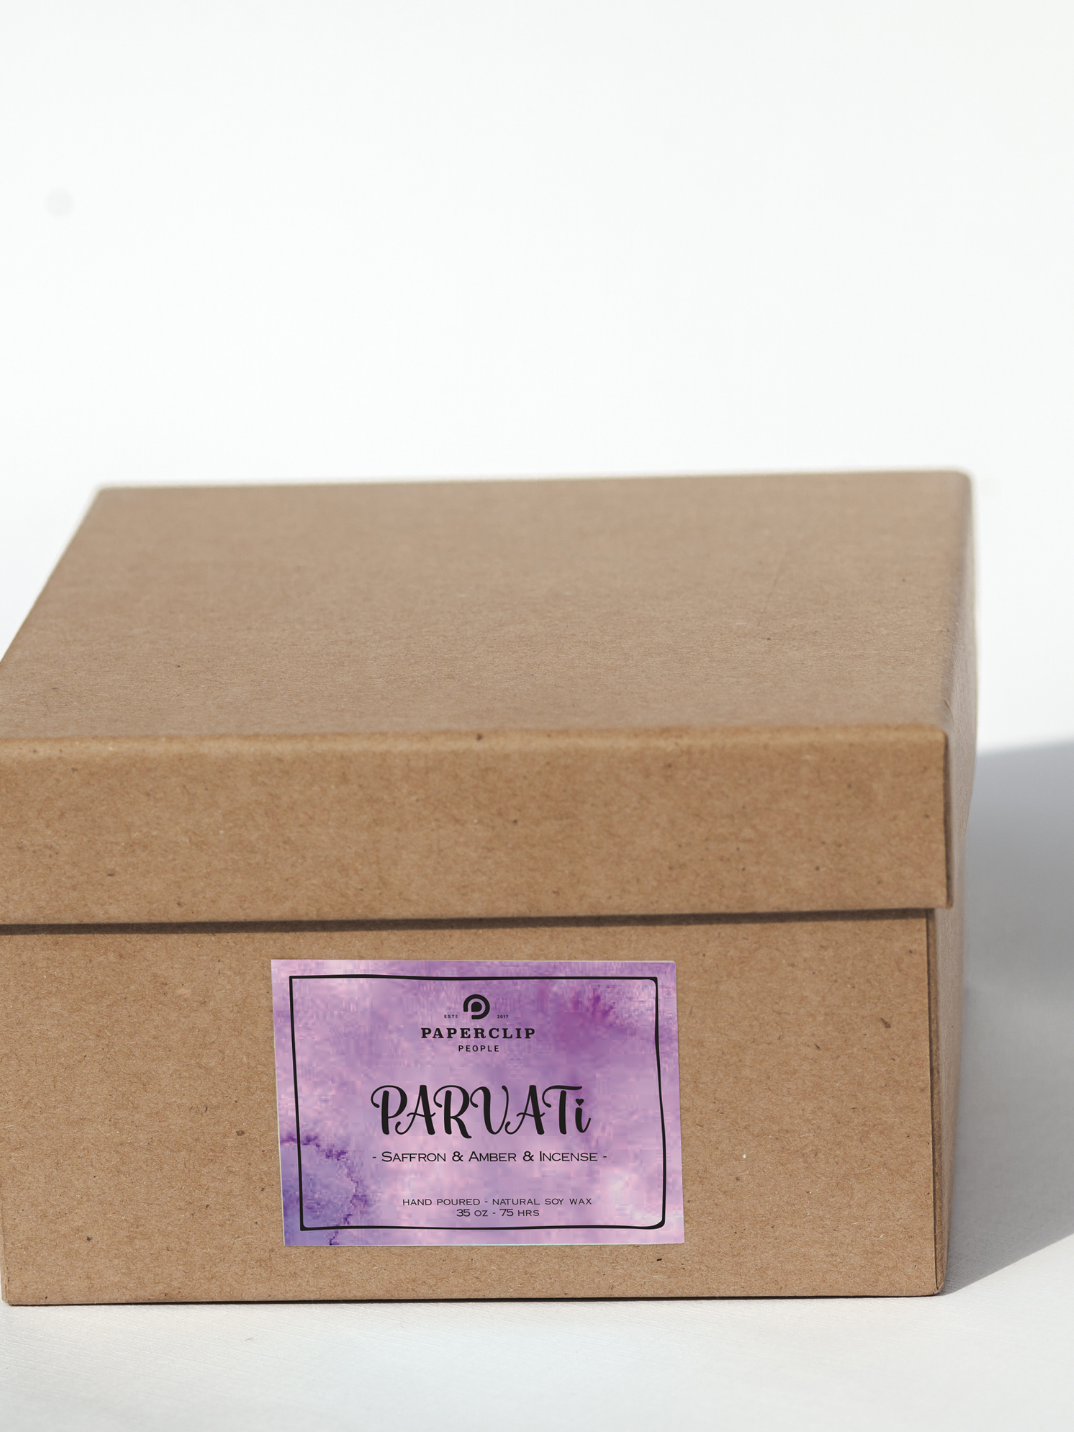 parvati saffron & incense scented candle hand poured in Bali ethically made shop candles now